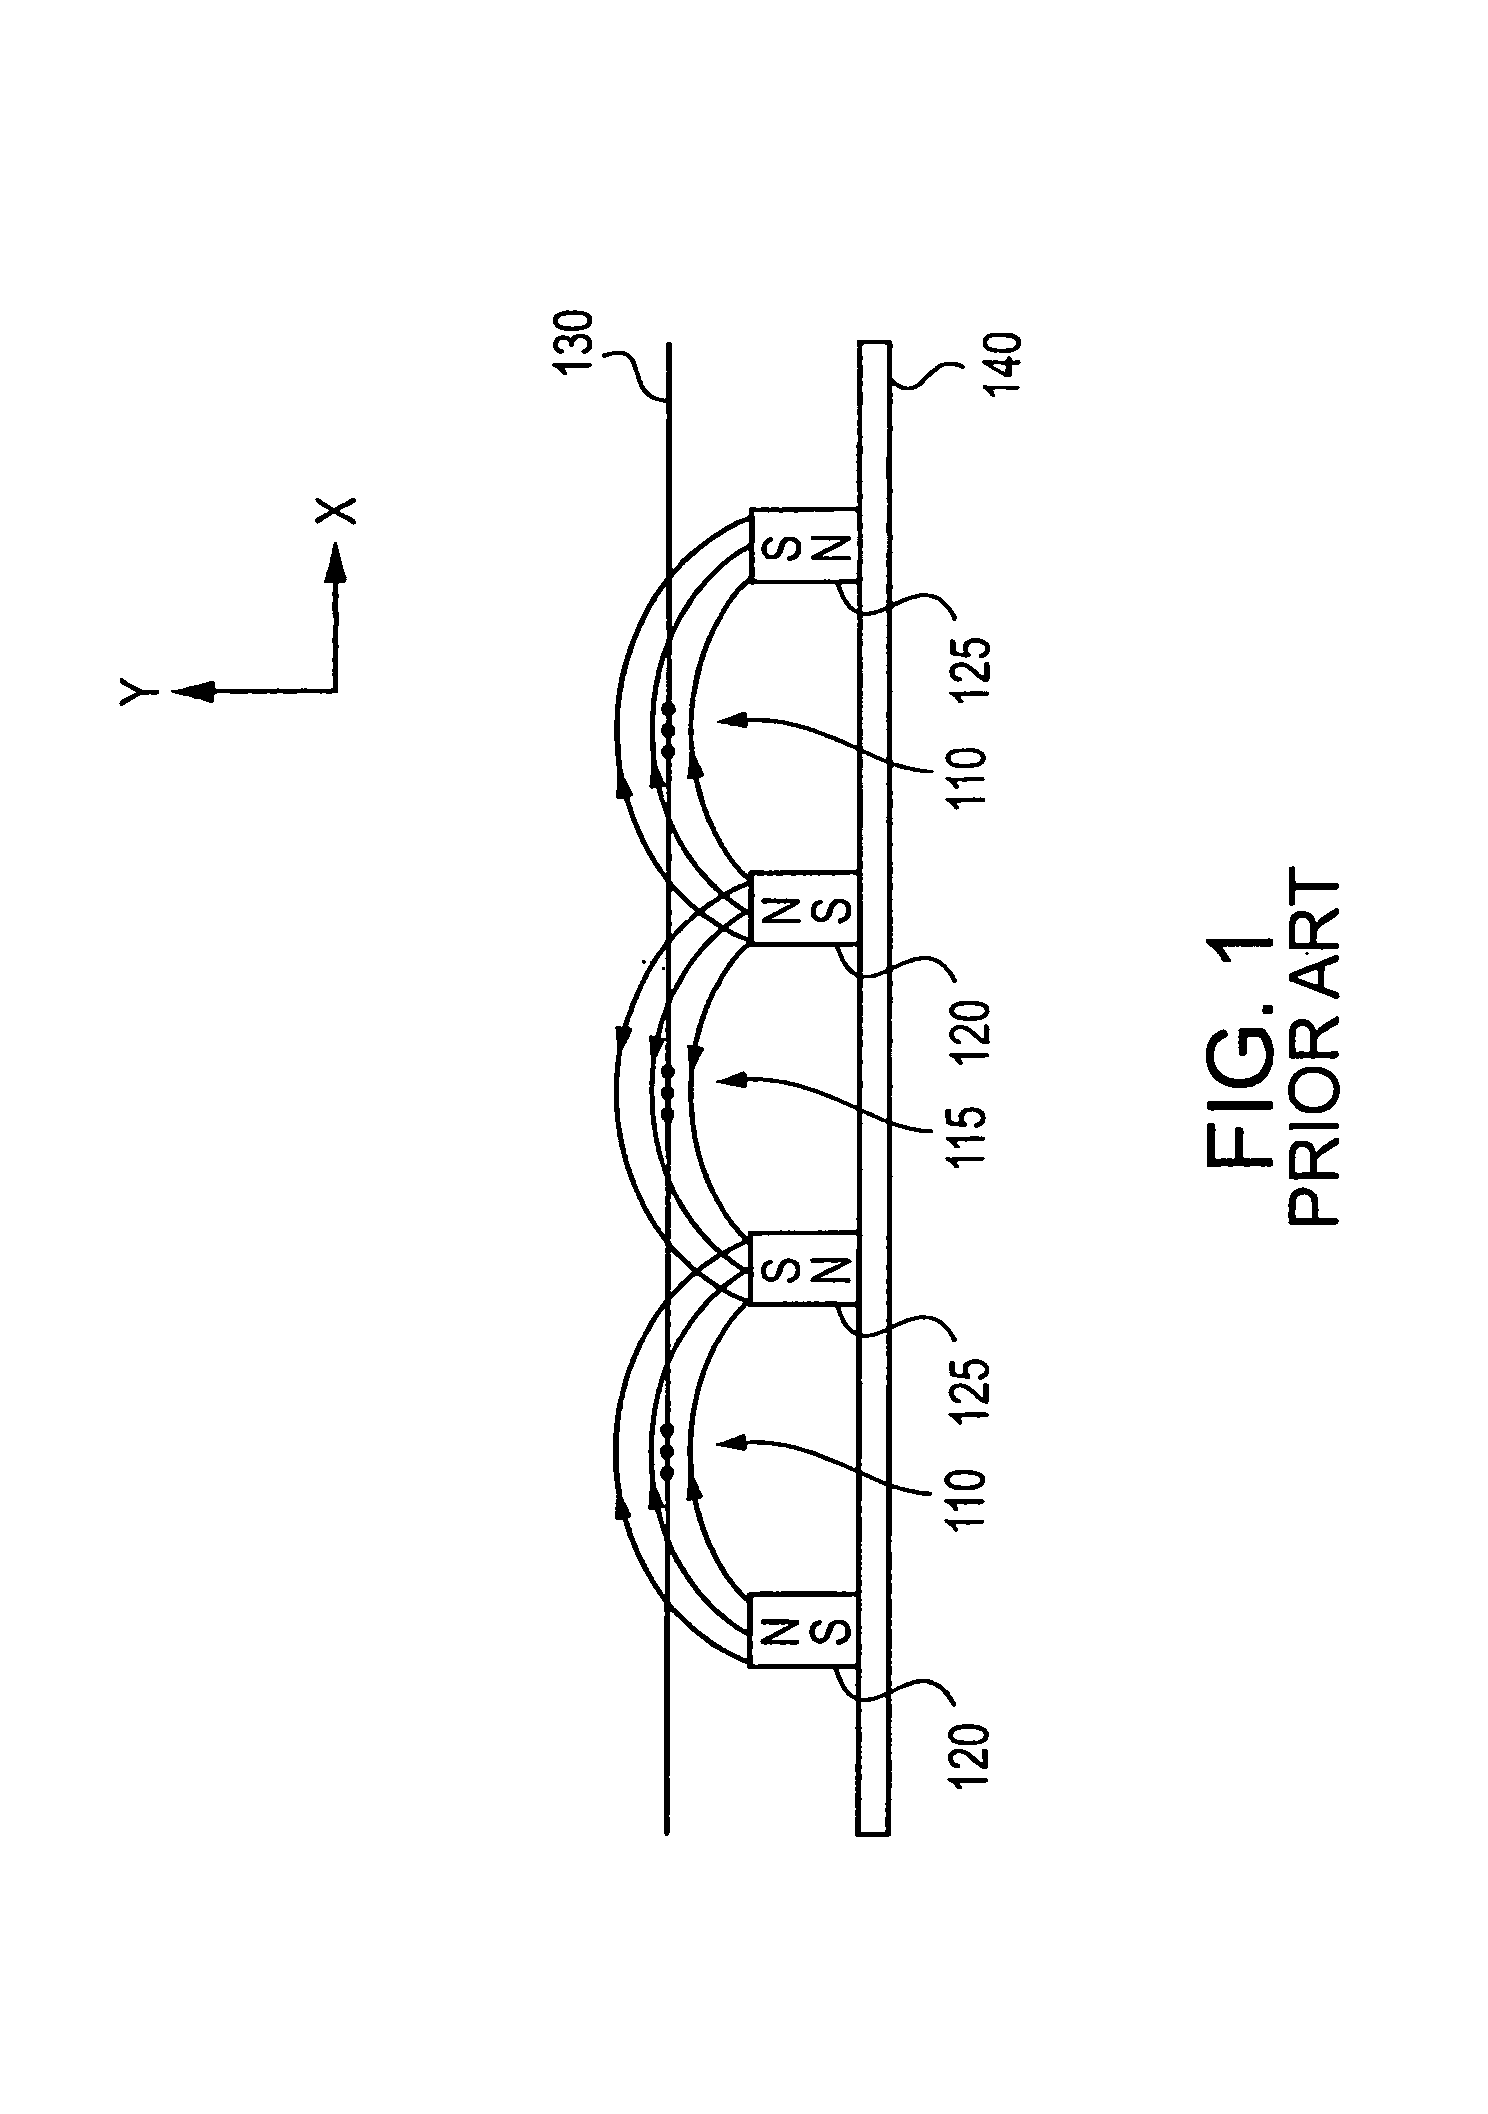 Acoustic transducer with folded diaphragm